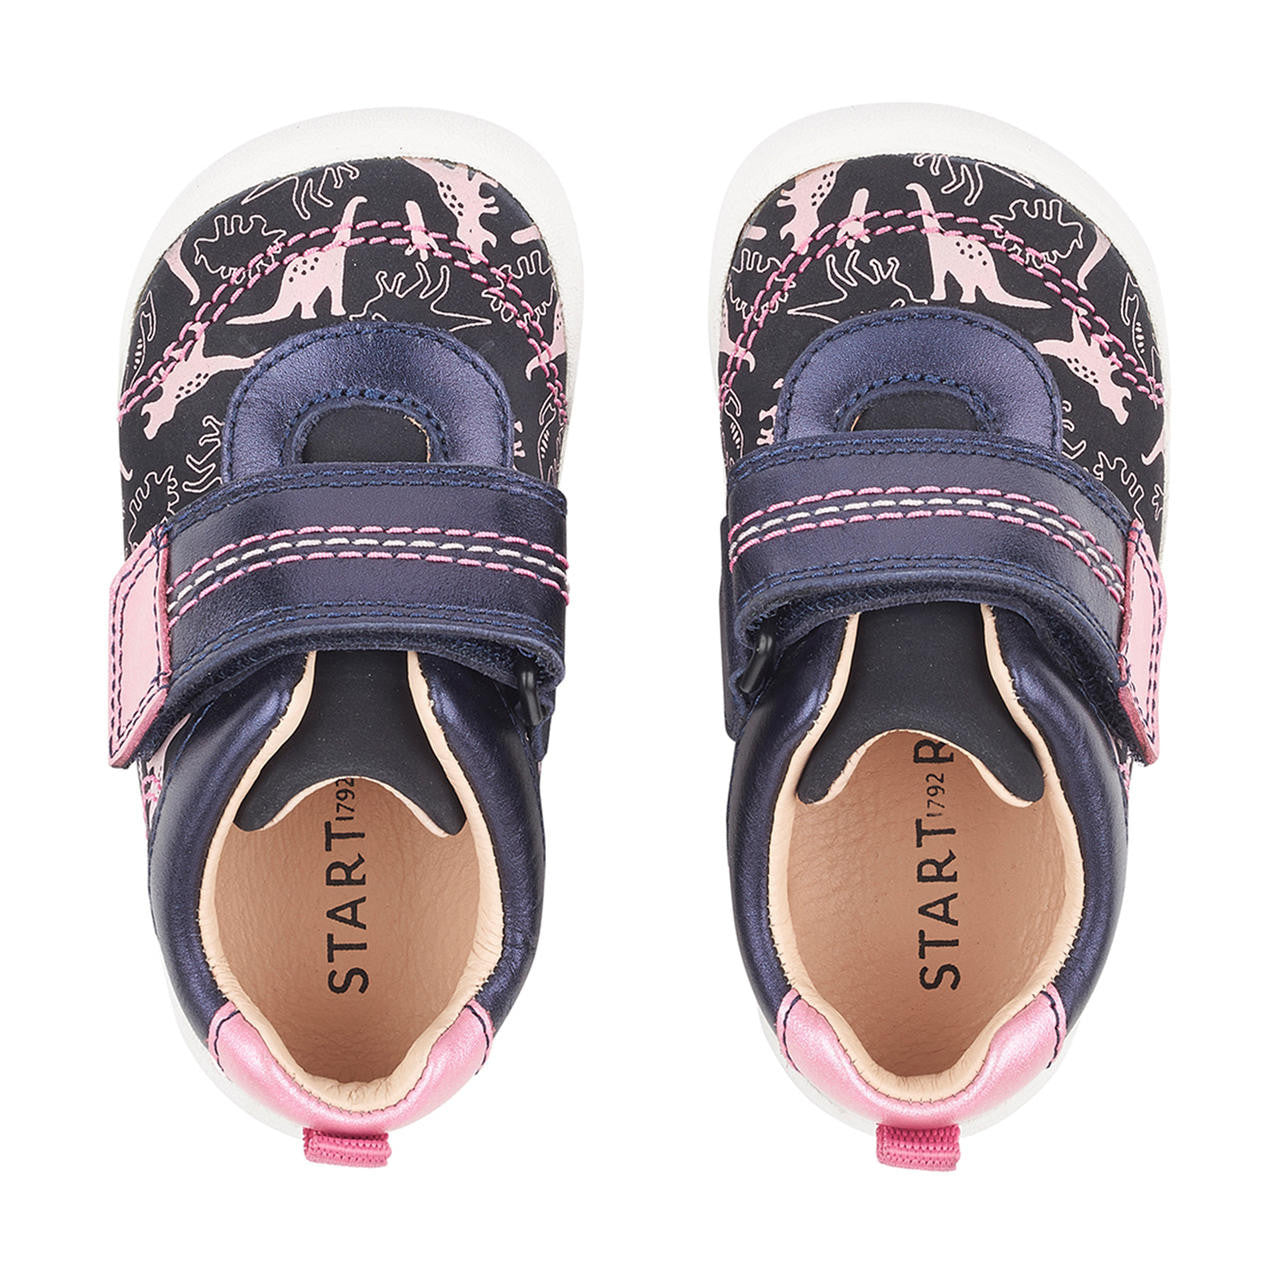 A pair of girls casual shoes by Start Rite, style Footprint, in navy and pink nubuck and leather with velcro fastening. Top view.